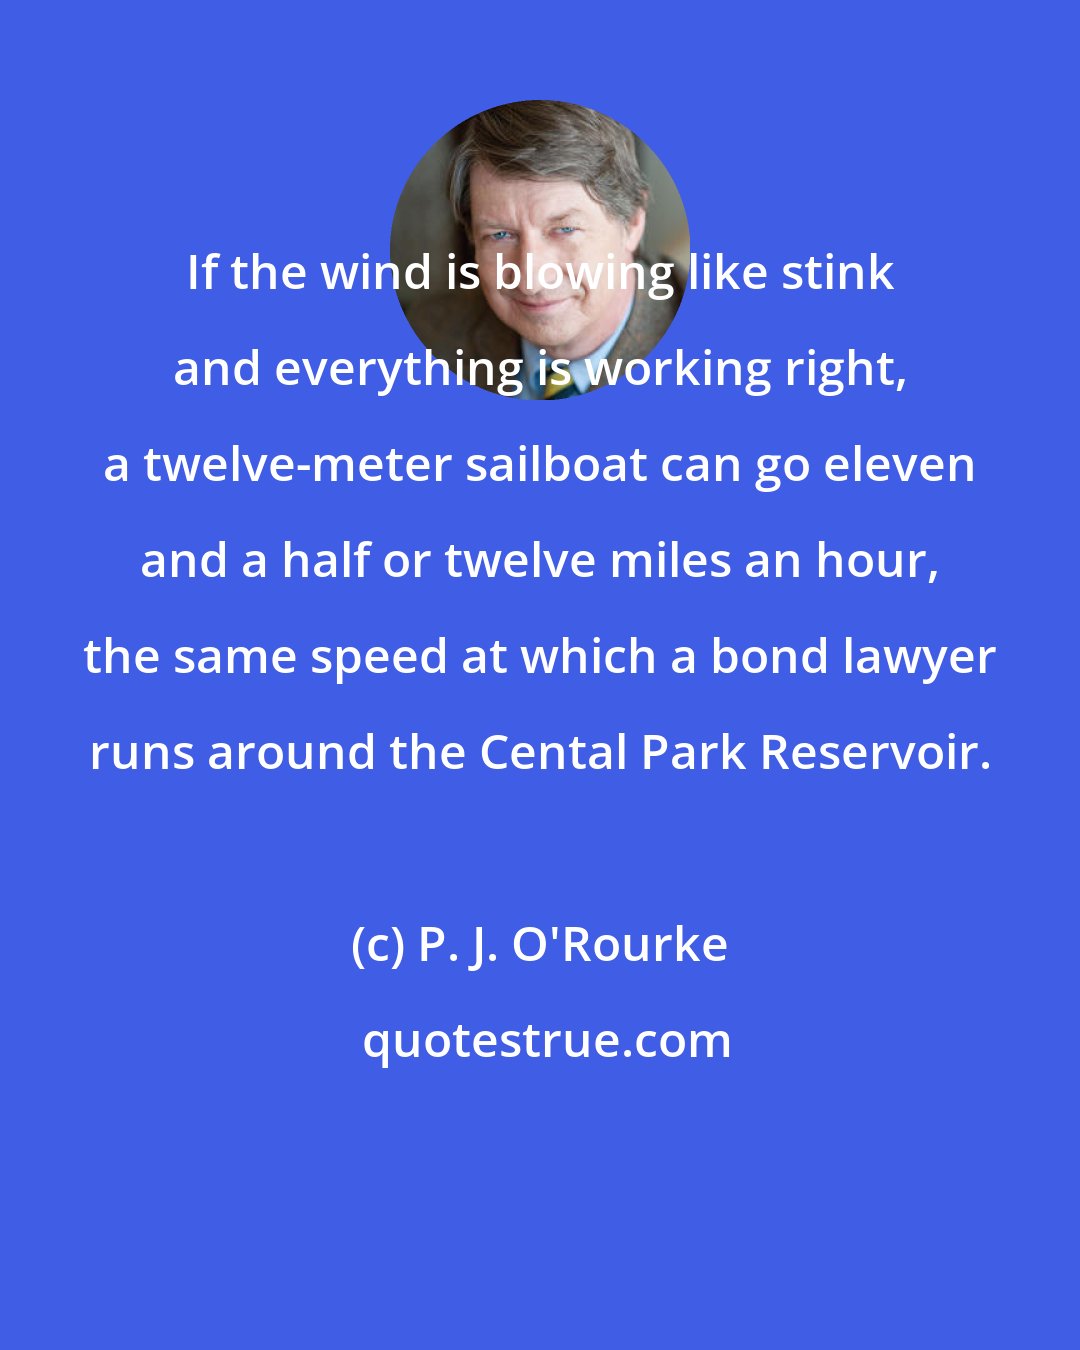 P. J. O'Rourke: If the wind is blowing like stink and everything is working right, a twelve-meter sailboat can go eleven and a half or twelve miles an hour, the same speed at which a bond lawyer runs around the Cental Park Reservoir.